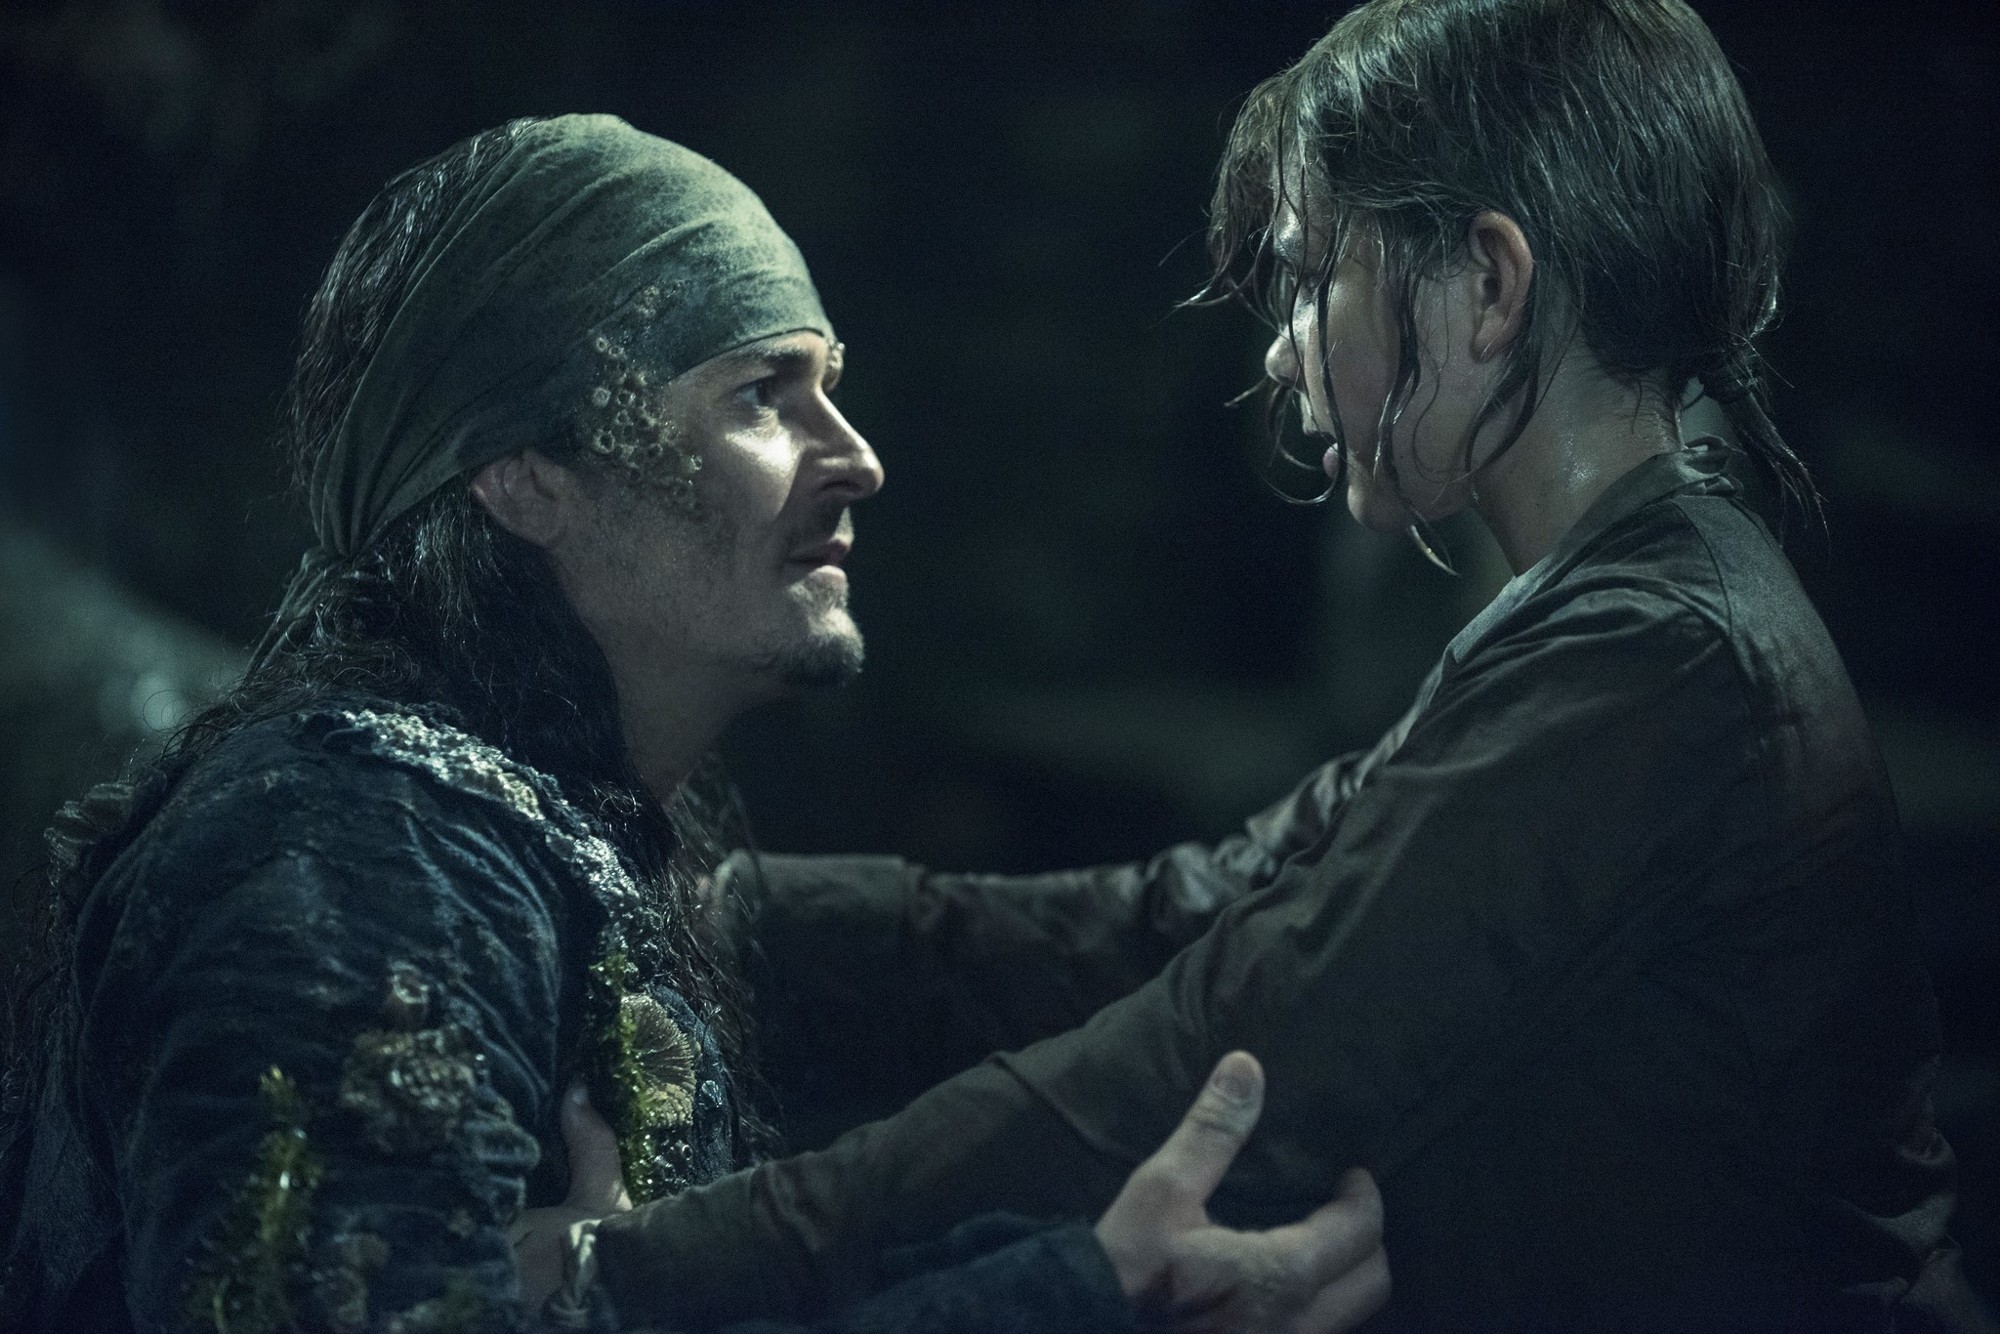 Orlando Bloom stars as Will Turner and Lewis McGowan stars as Henry Turner in Walt Disney Pictures' Pirates of the Caribbean: Dead Men Tell No Tales (2017)